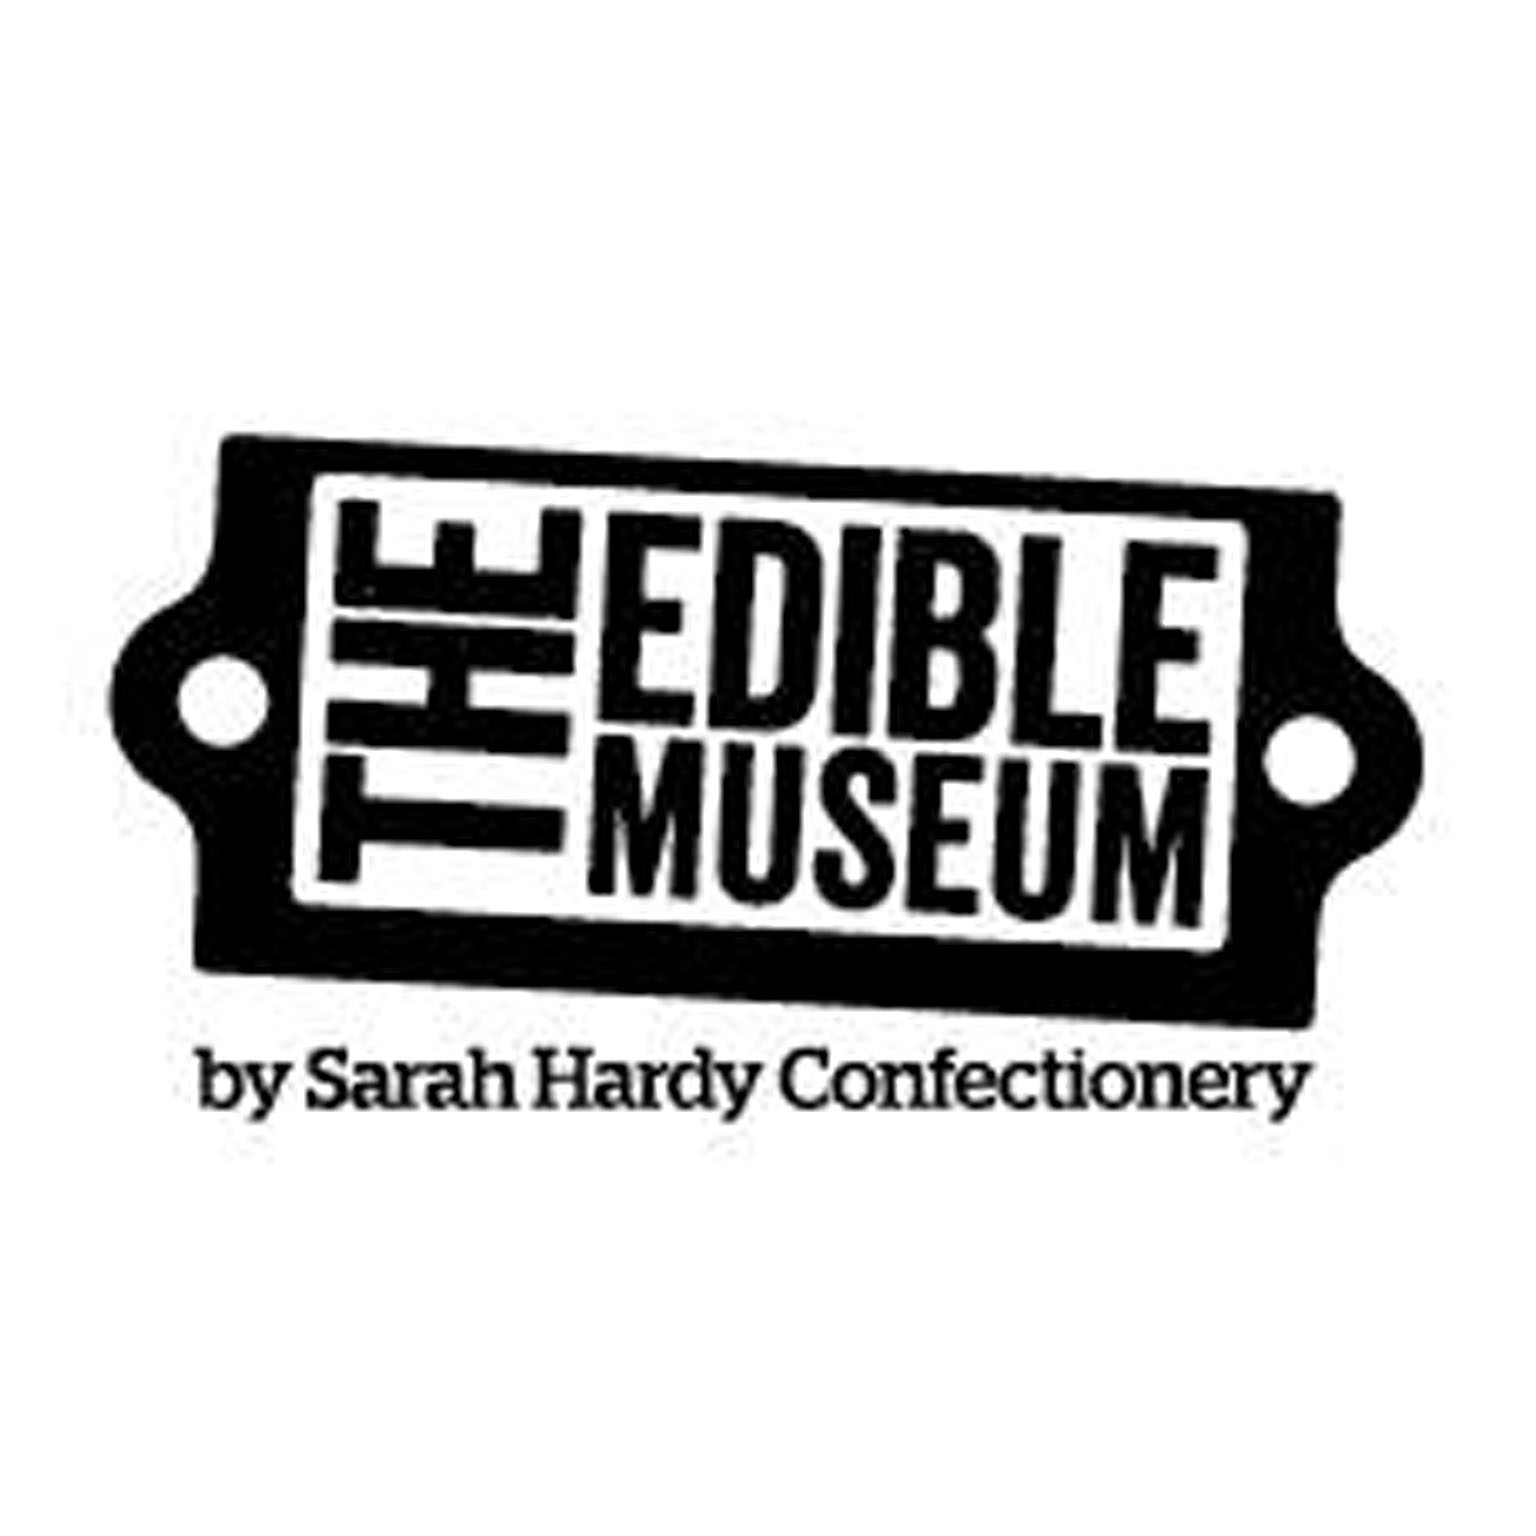 The Edible Museum